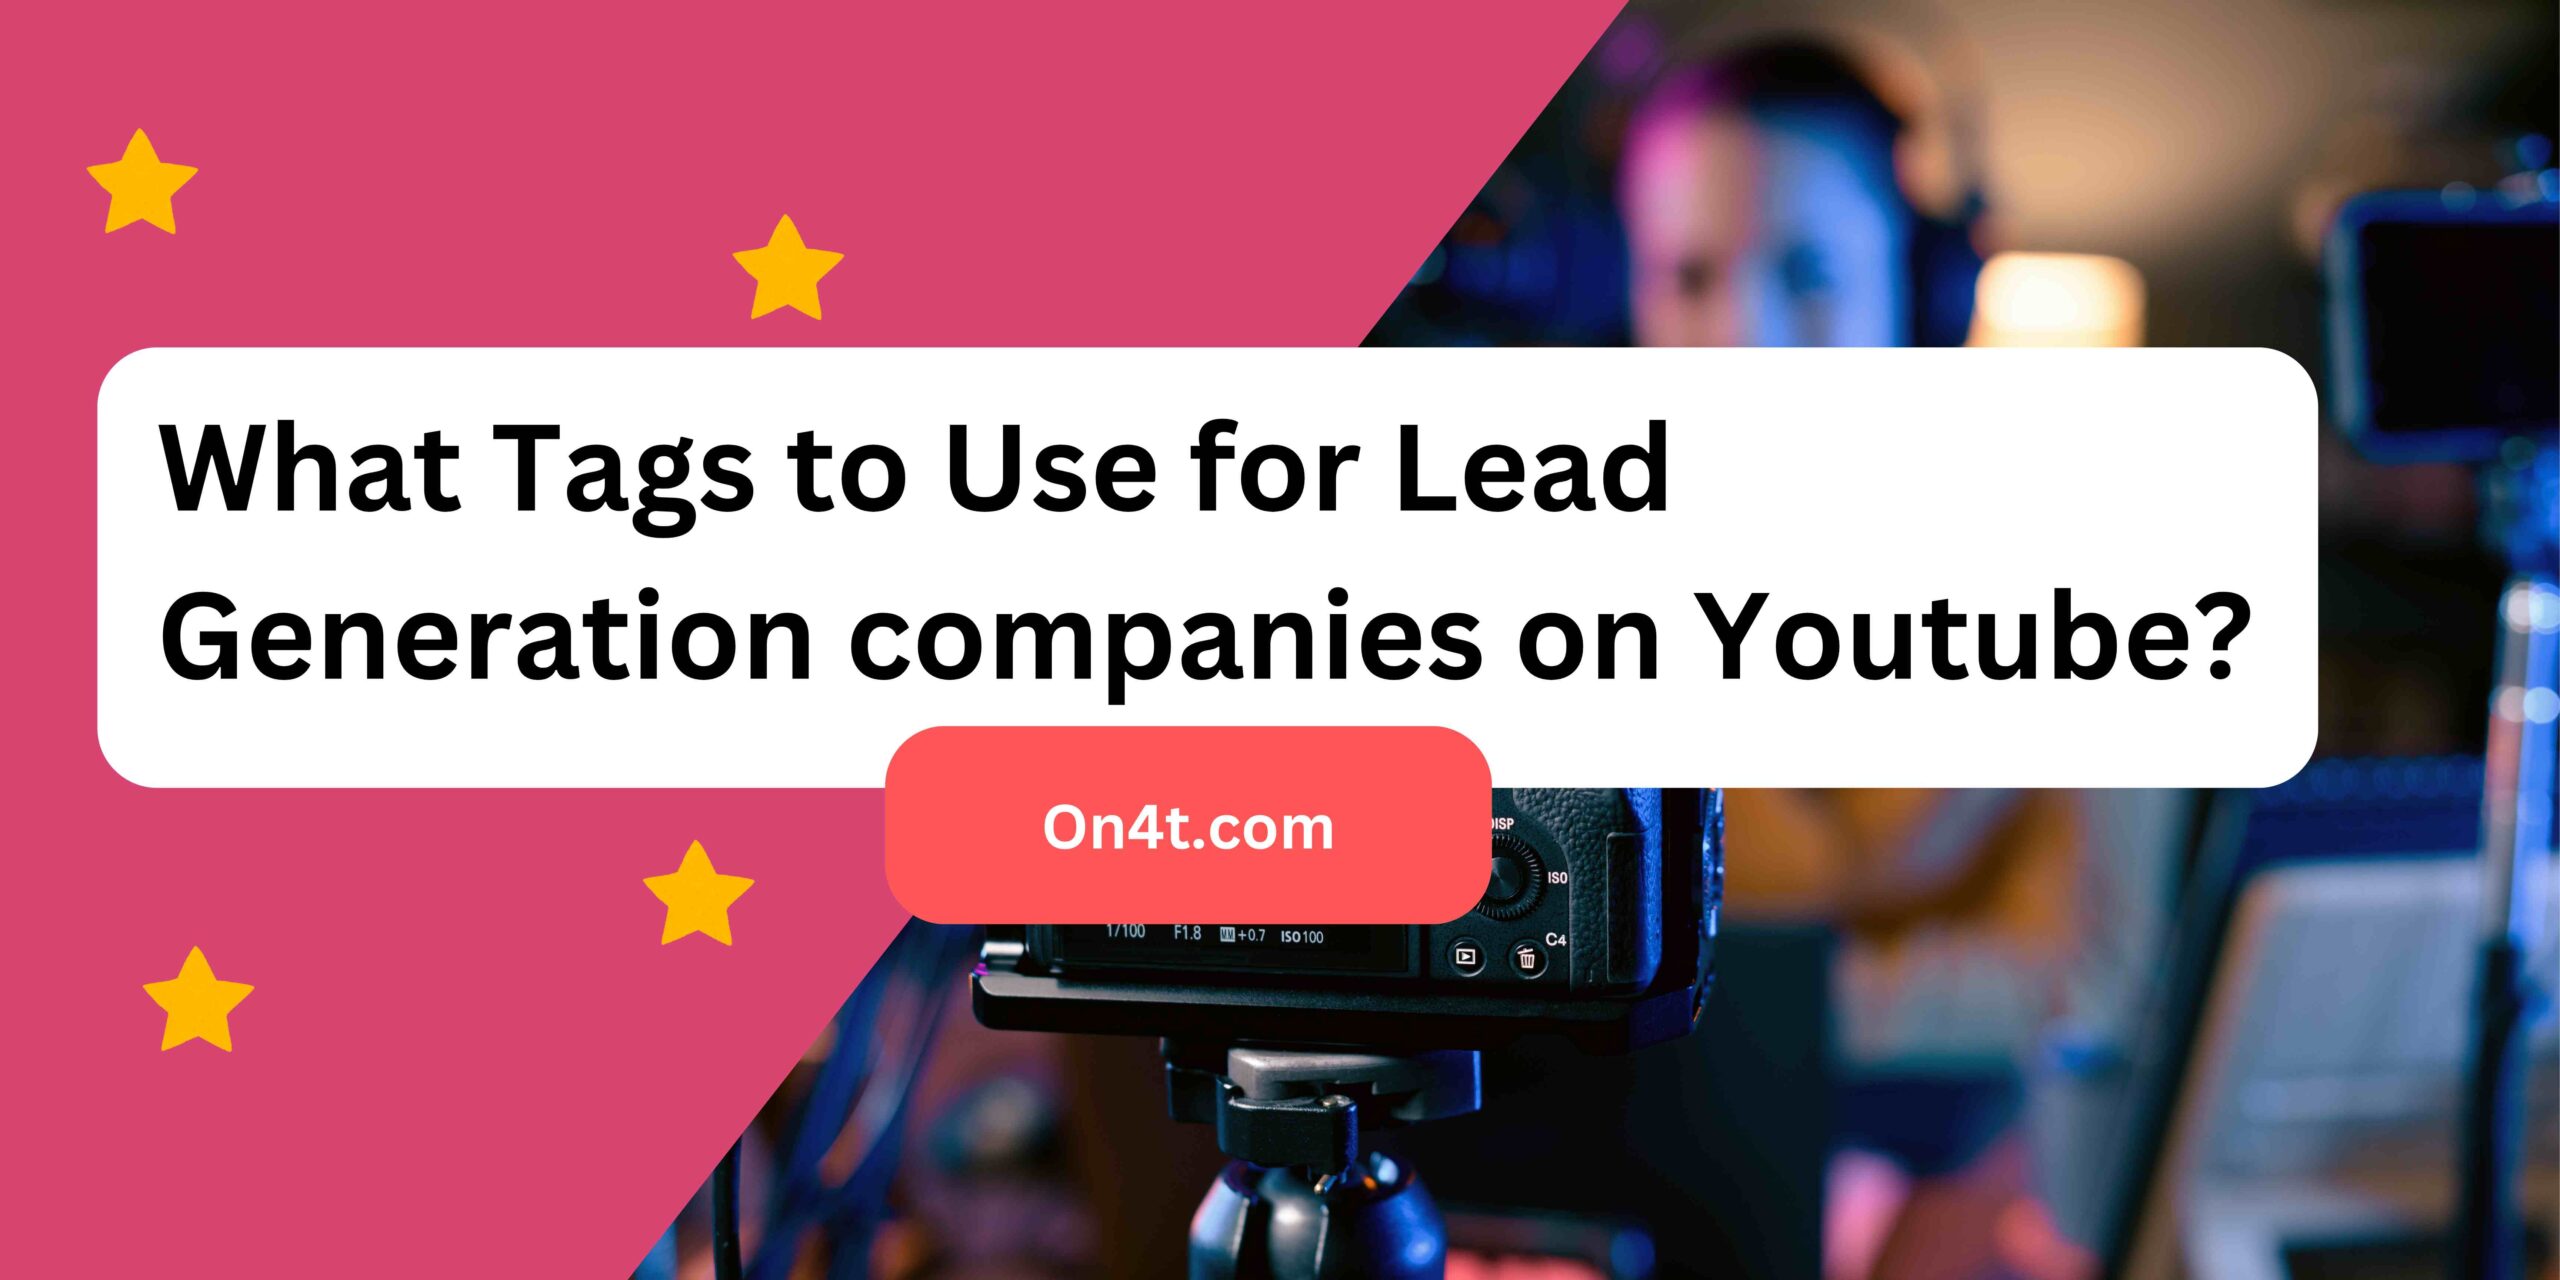 What Tags to Use for Lead Generation companies on Youtube?